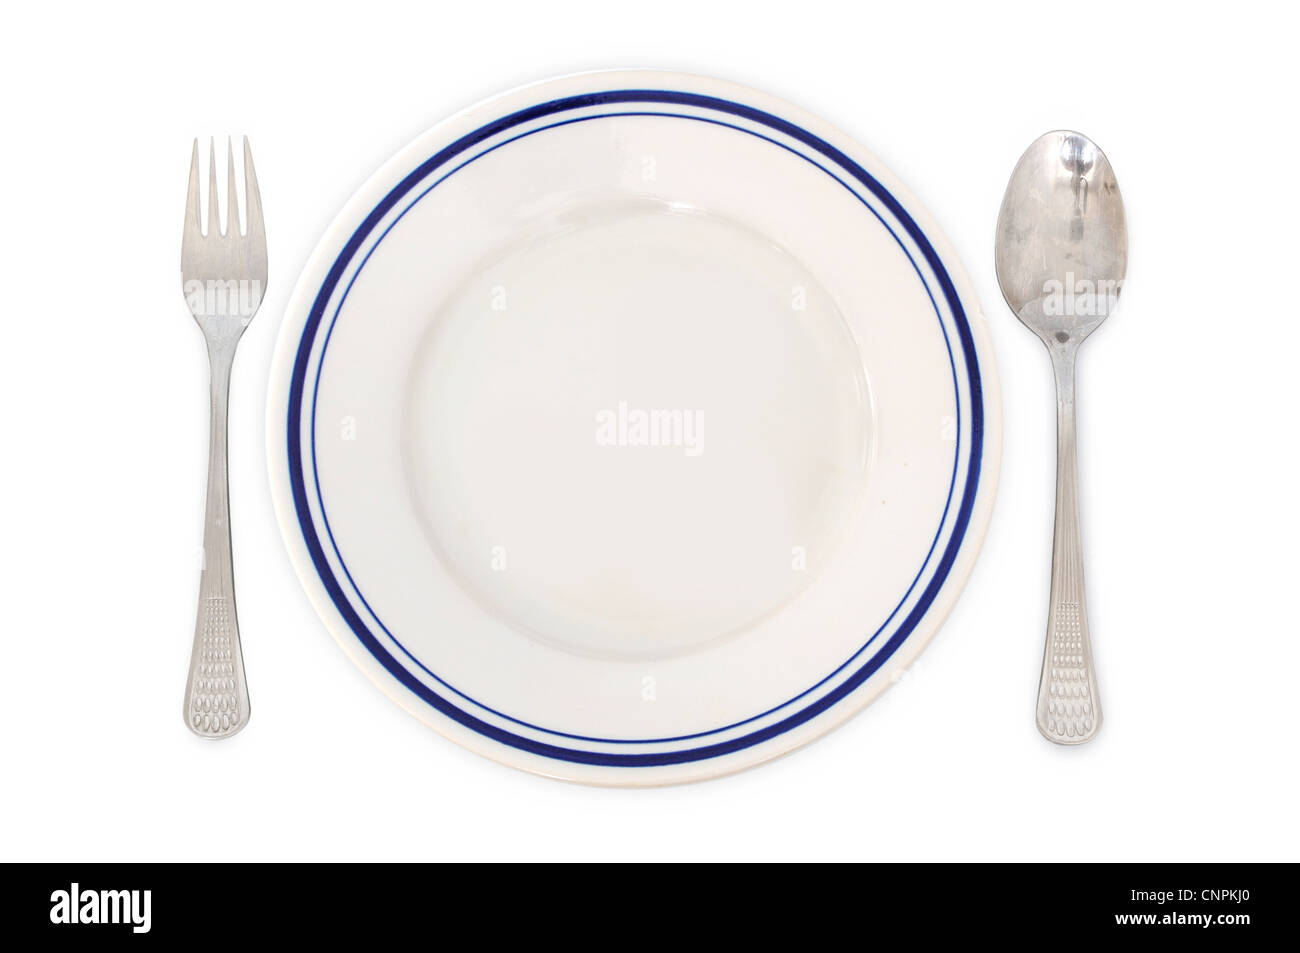 Simple arrangement for dinner - plate, fork and spoon Stock Photo